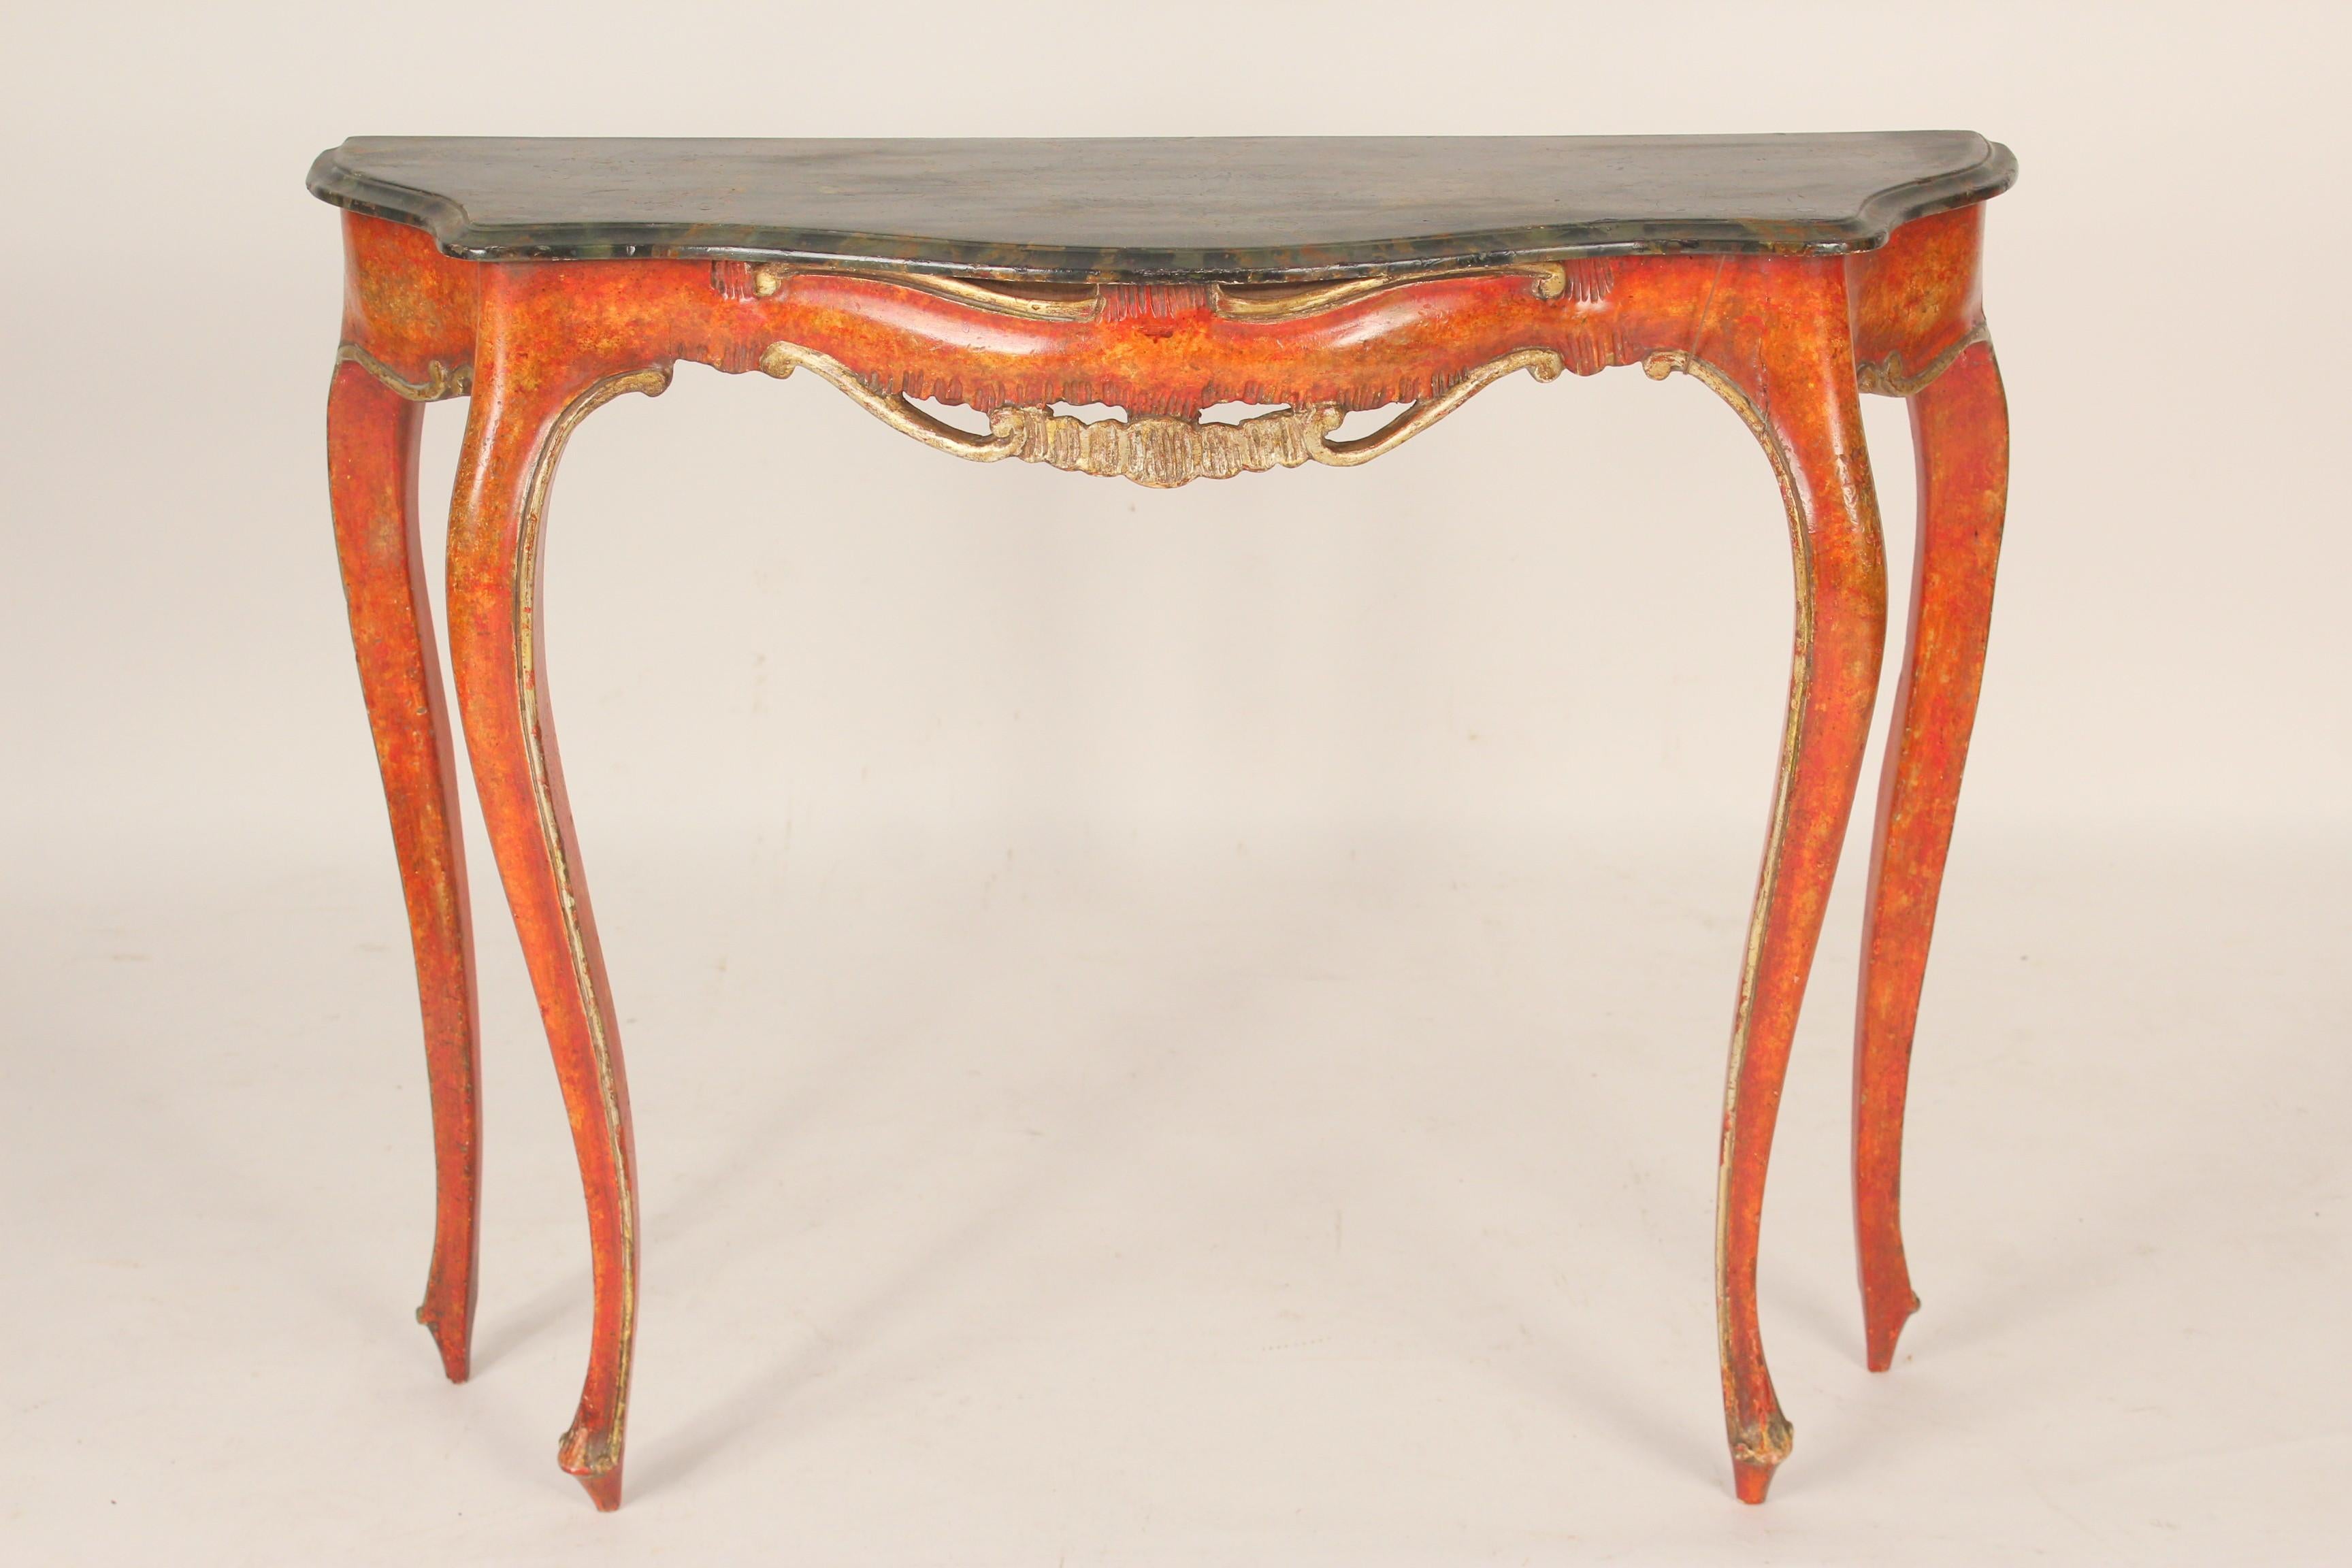 Italian Louis XV style red painted console table with gilt wood trim and a faux marble (wood painted to look like marble) top, circa 1930-1950.